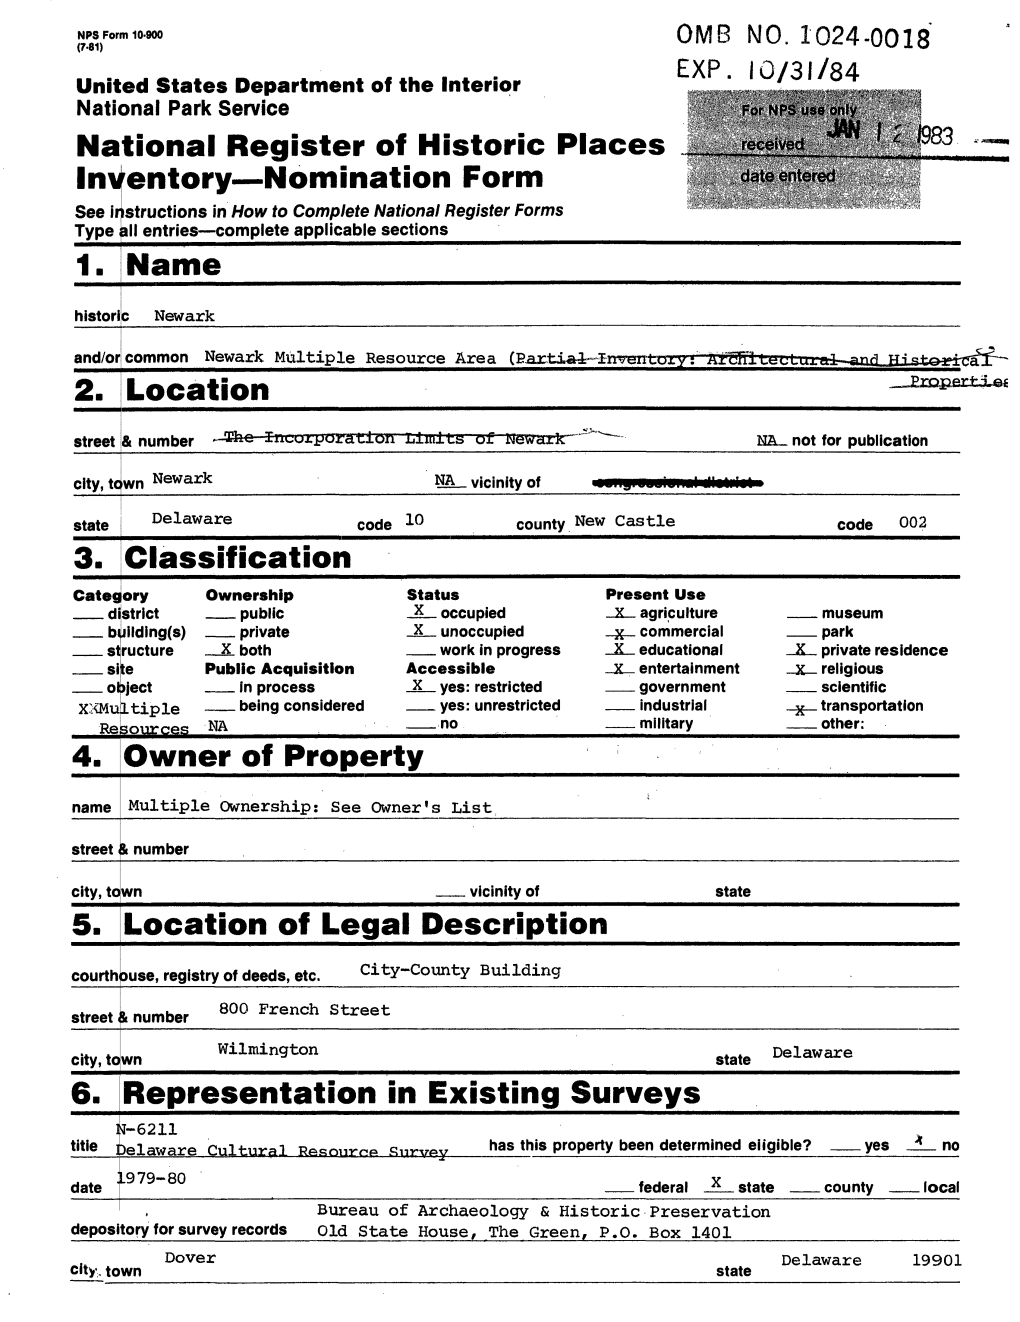 Ln\ Fentory-Nomination Form Jjj} Name Location Classification Owner Of